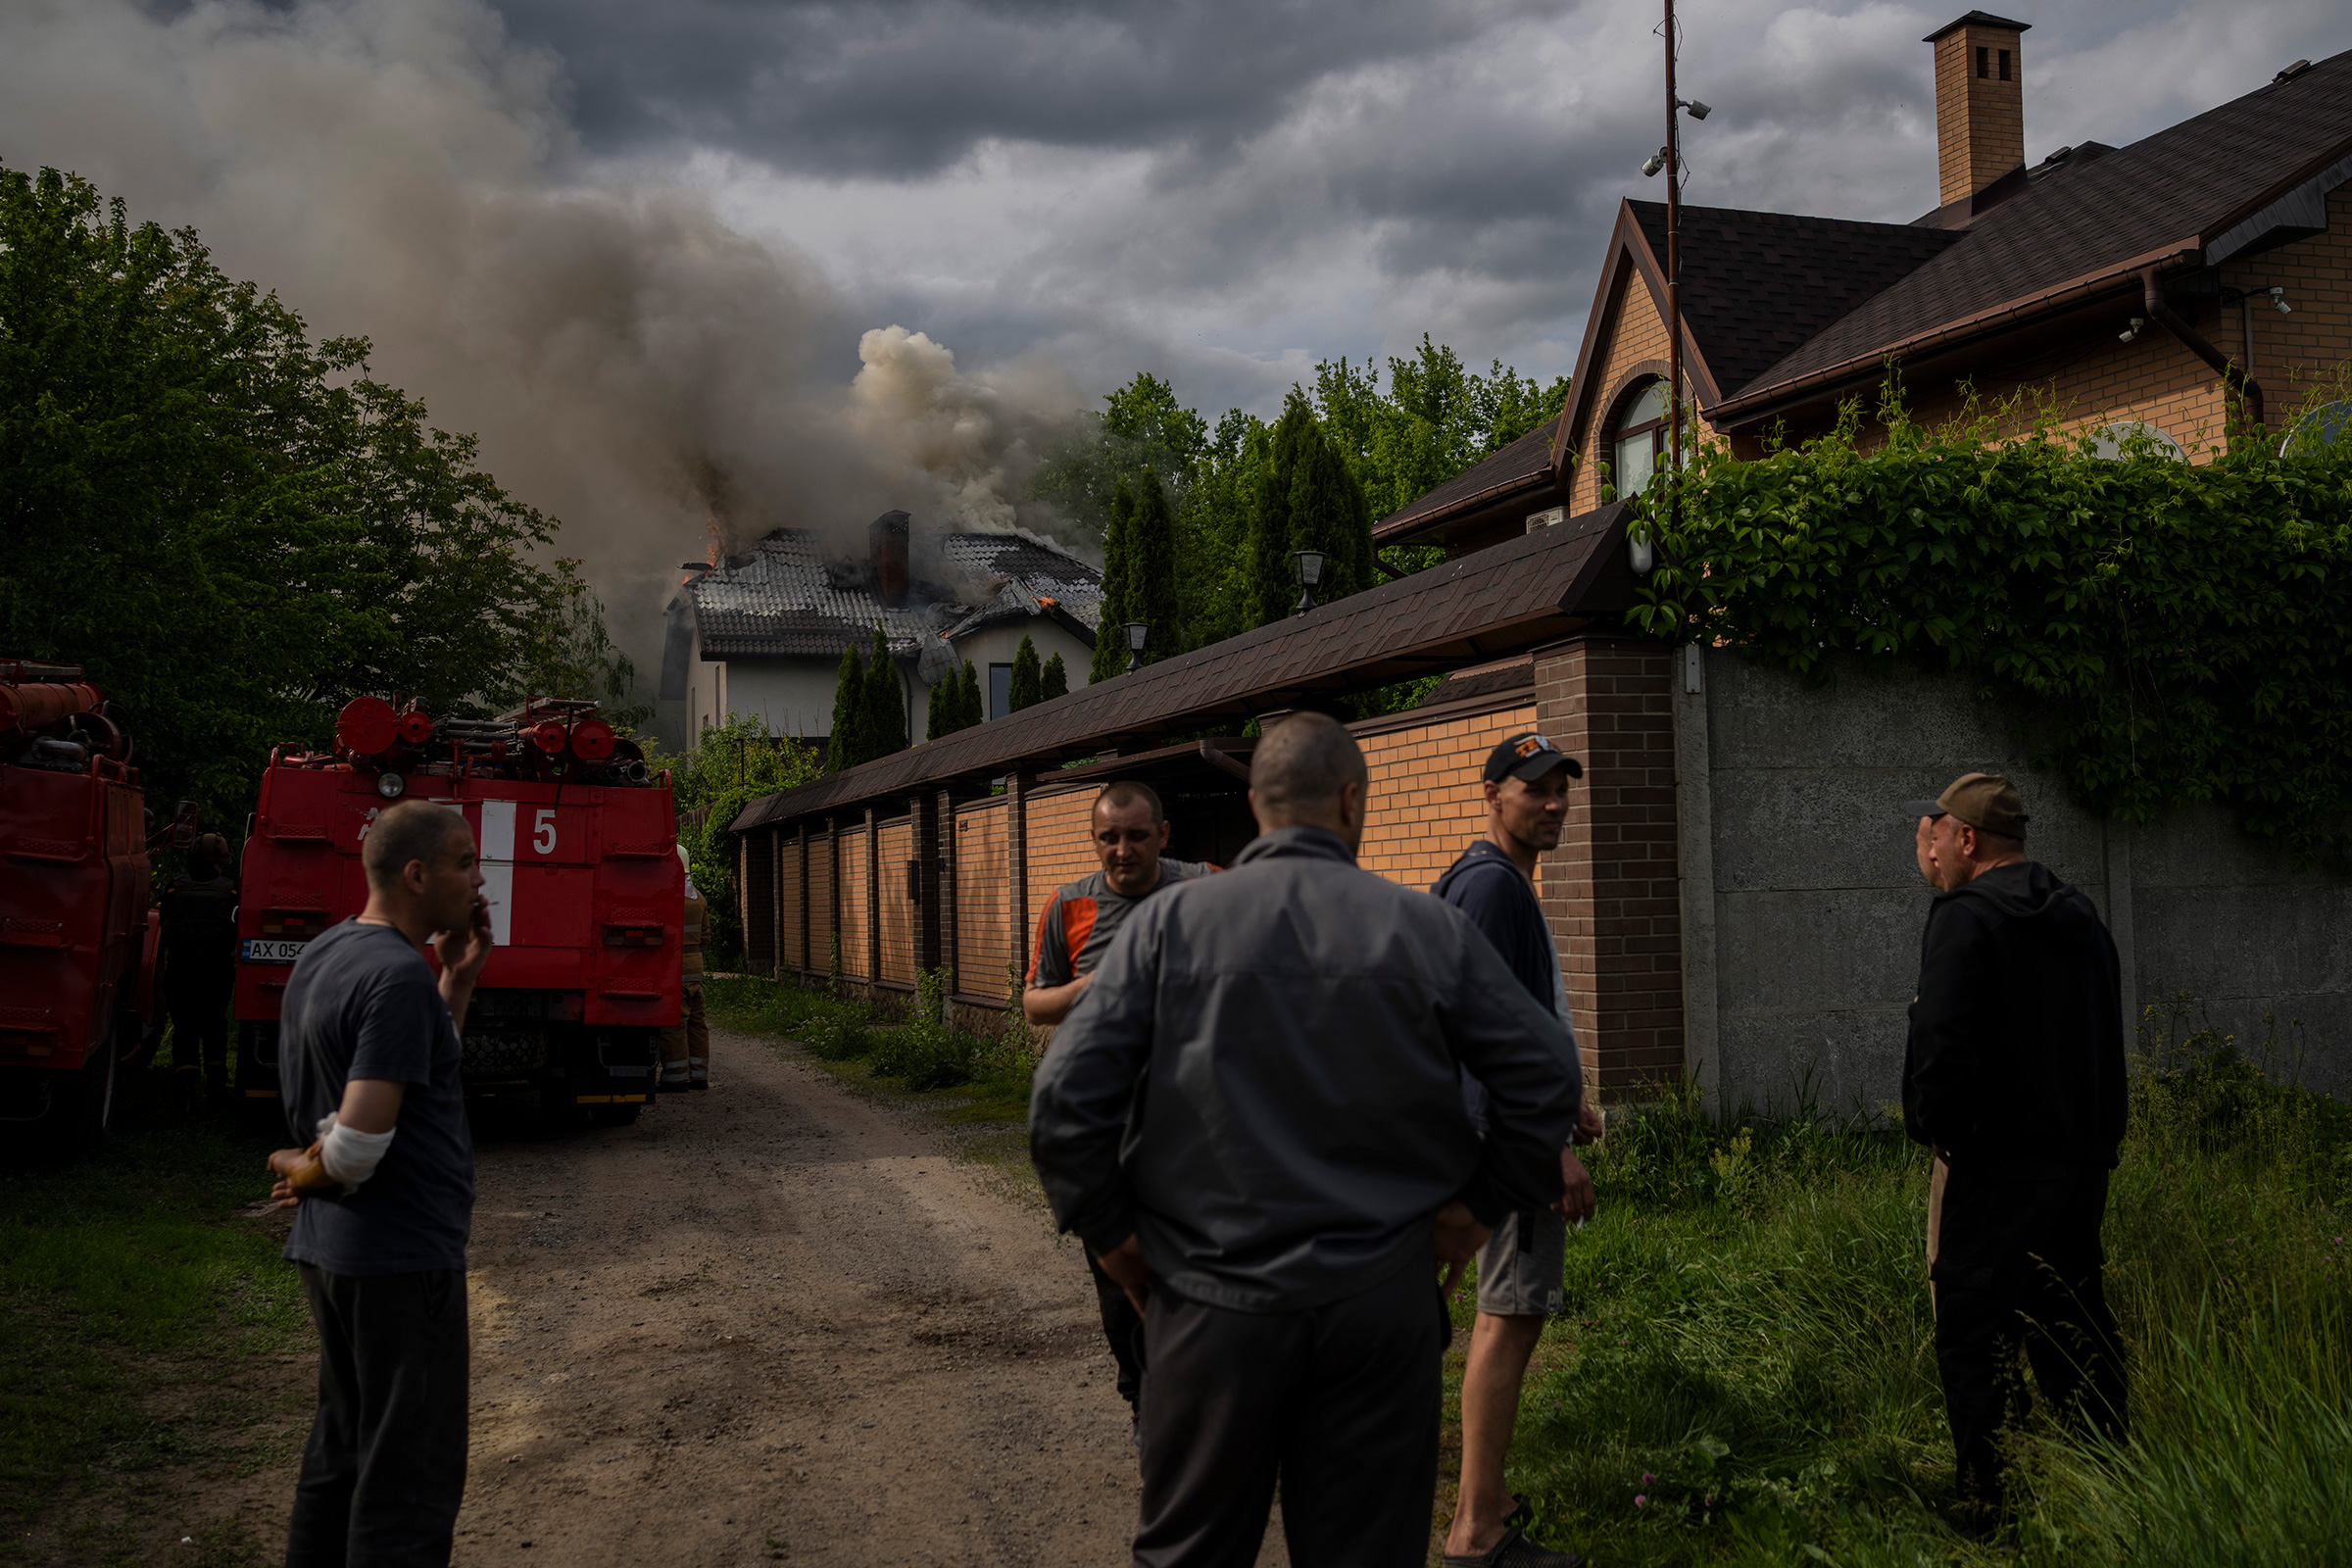 Neighbors gather around a house on fire that was hit during a Russian attack with a cluster-type munition in Kharkiv, Ukraine, on May 30, 2022. (Bernat Armangue—AP)